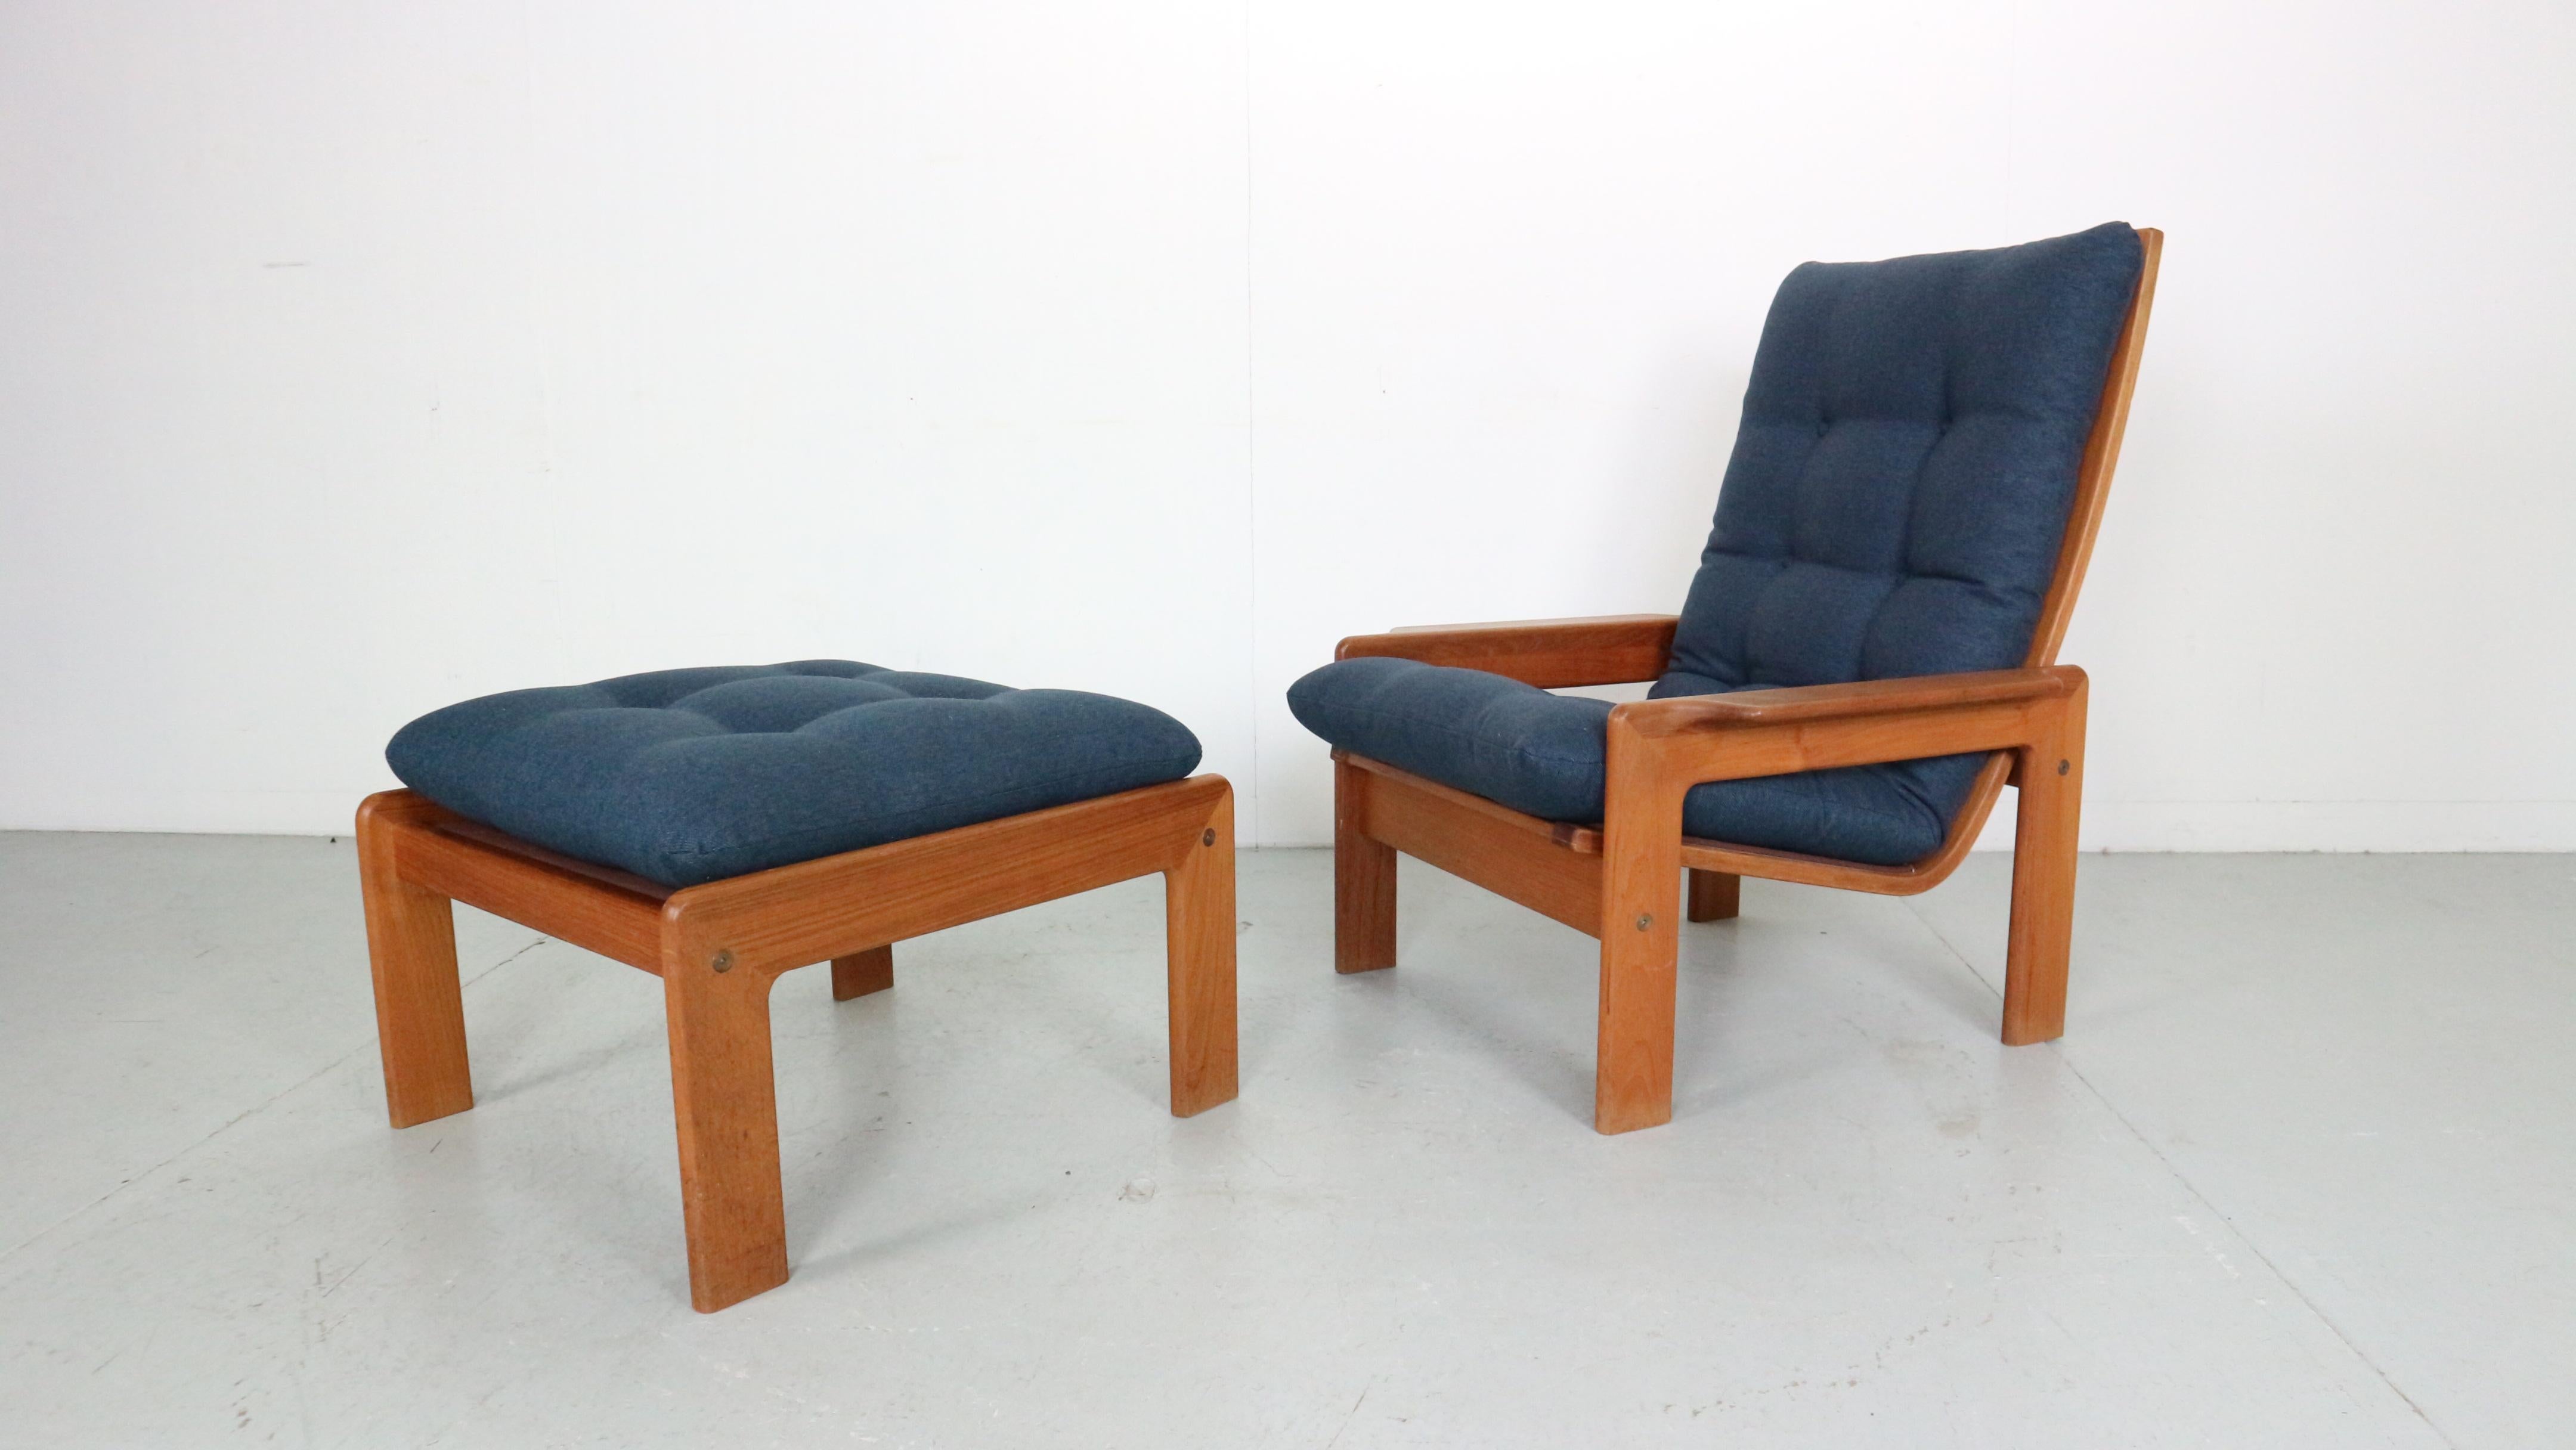 Stylish Vintage Danish Modern easy chair and ottoman, designed and manufactured by EMC Møbler, 1960's period Denmark.

This comfortable, solid teak chair features the typical midcentury Denmark organic design and new blue upholstery. 
The design